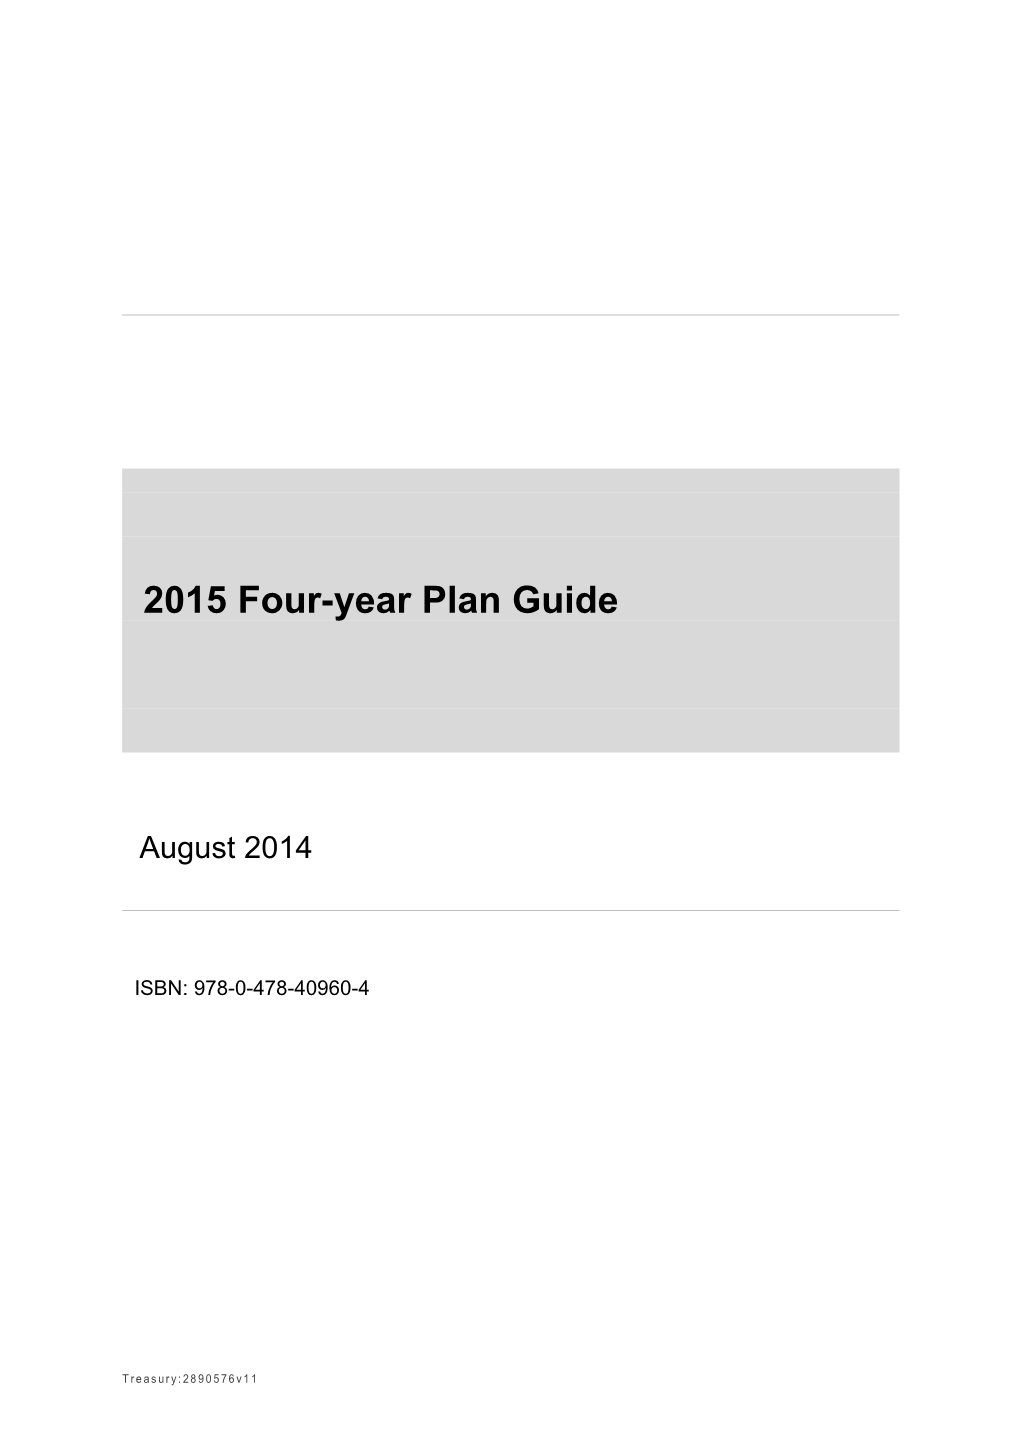 2015 Four-Year Plan Guide